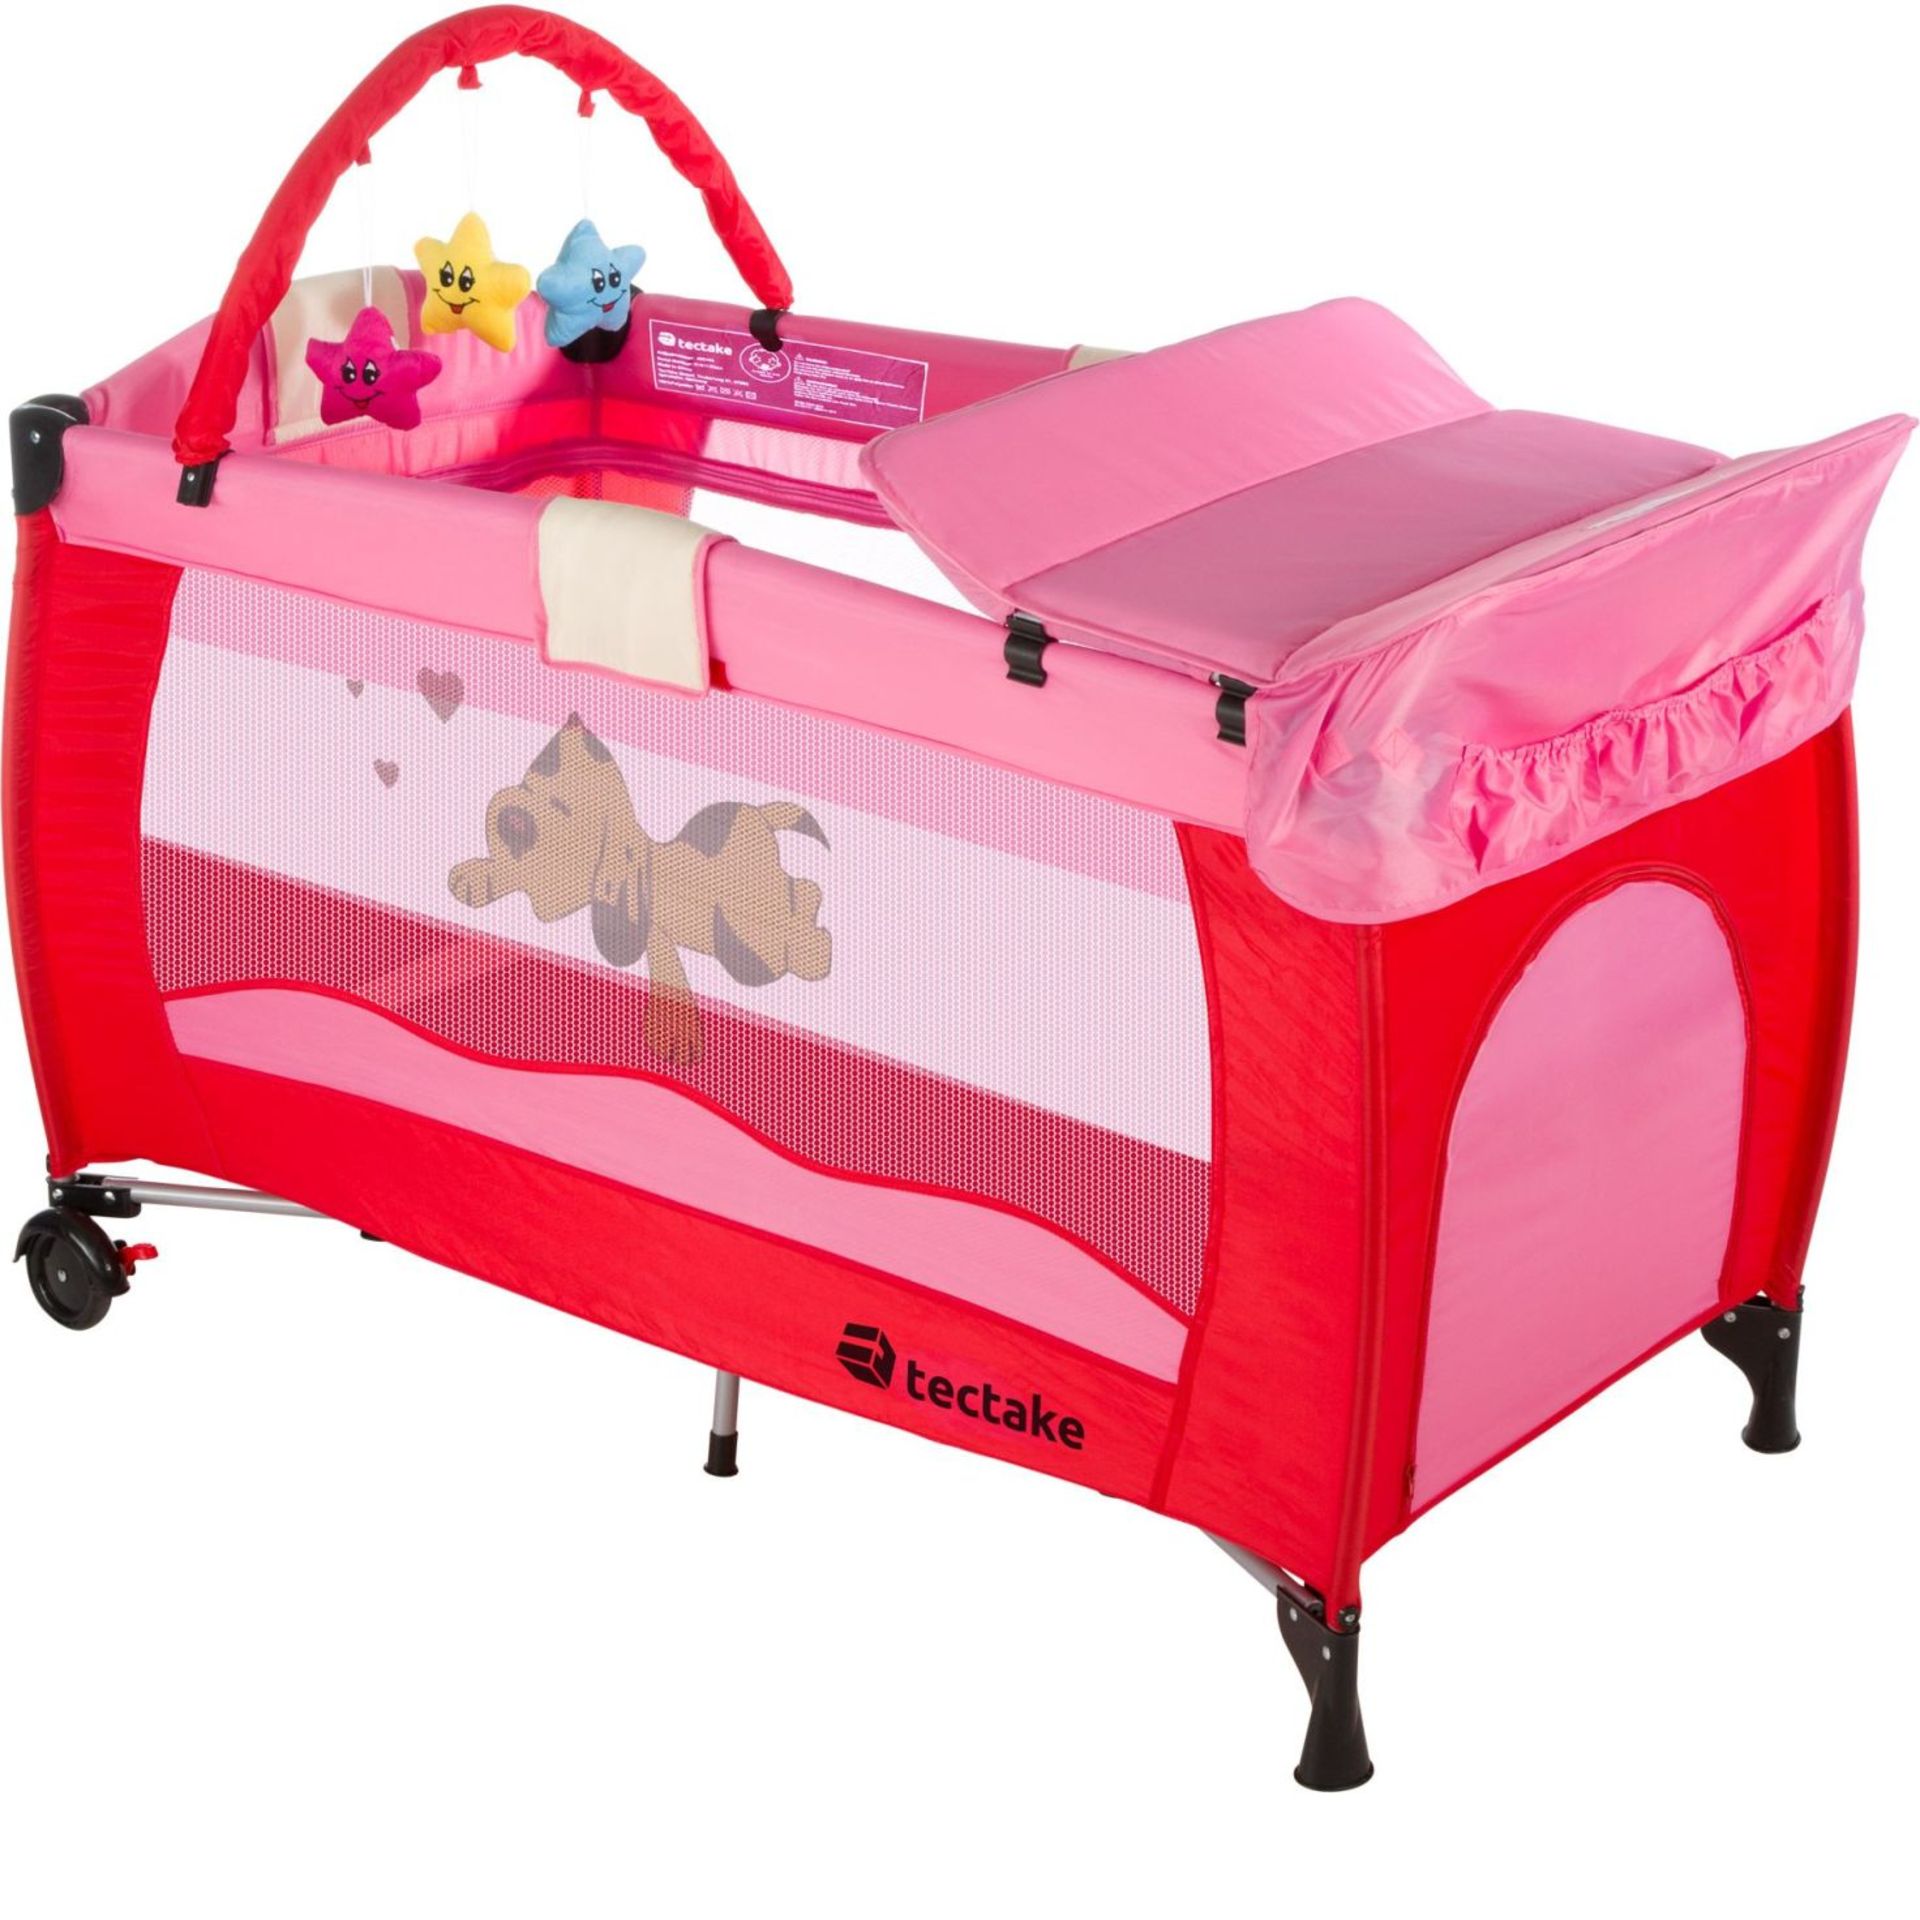 Tectake - Travel Cot Dog With Changing Mat And Play Bar Pink - Boxed. RRP £72.99 - Image 2 of 2